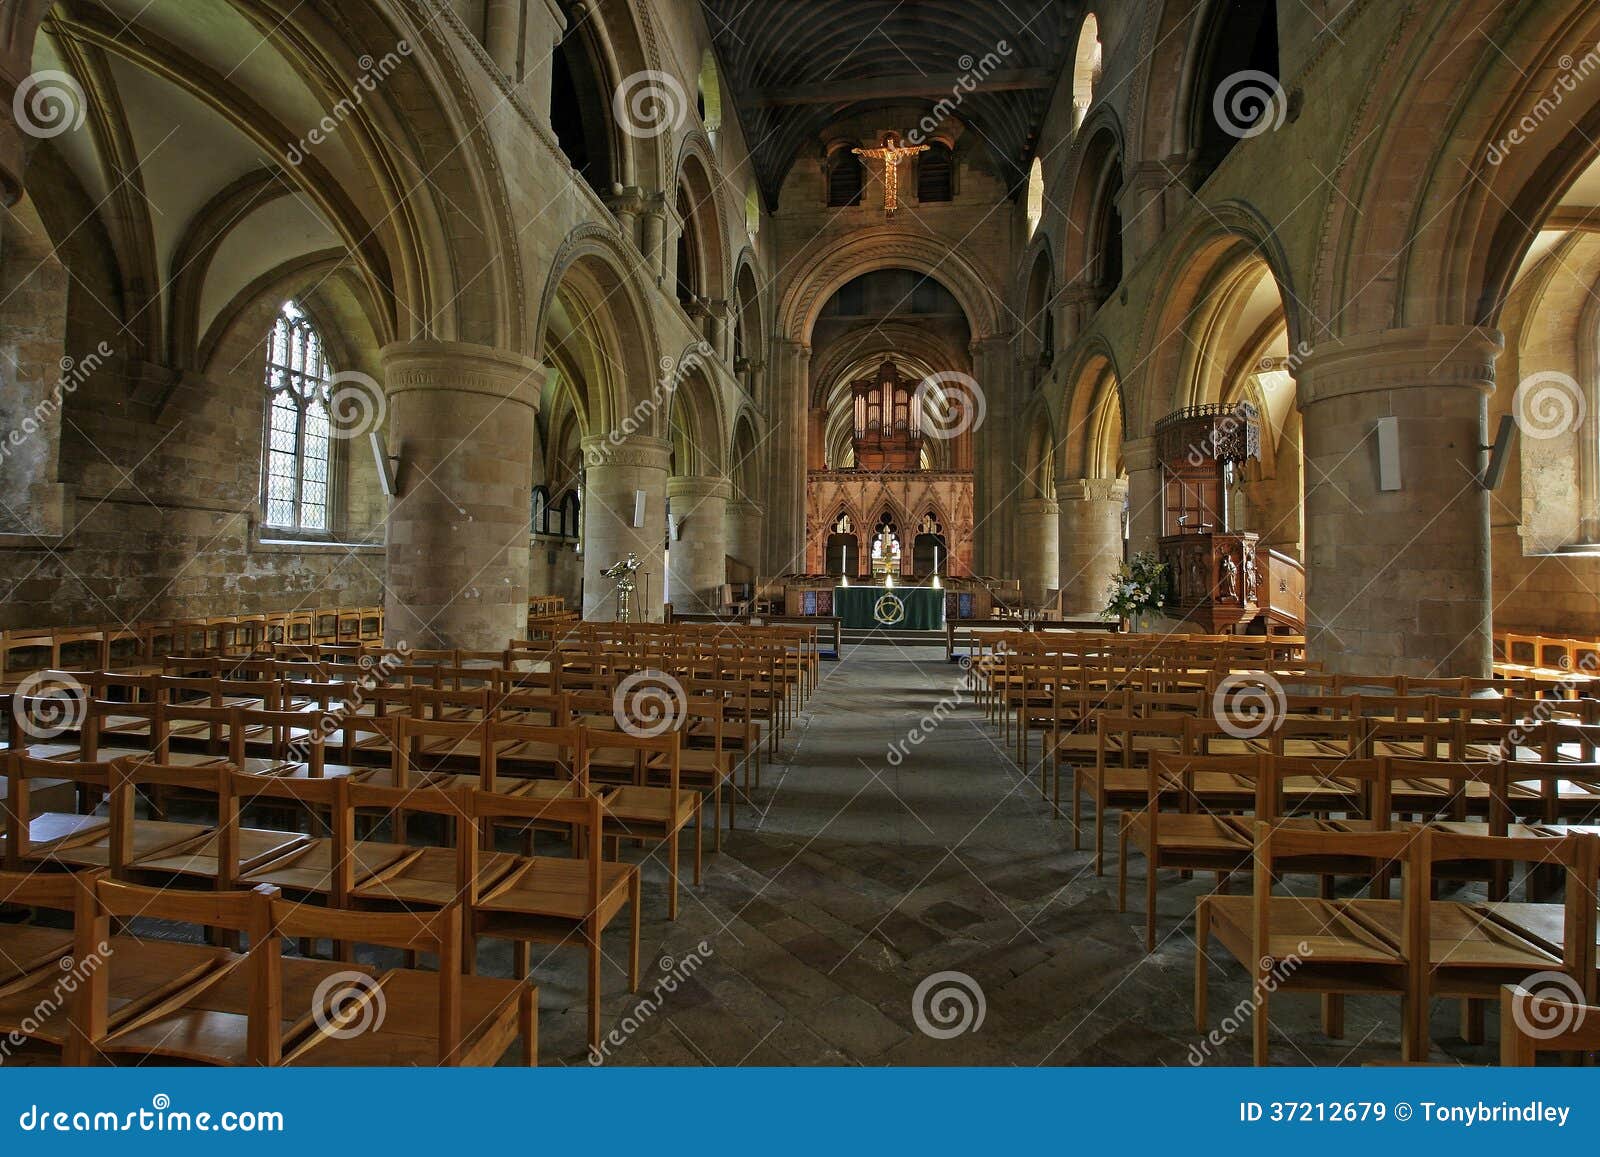 southwell minster nave